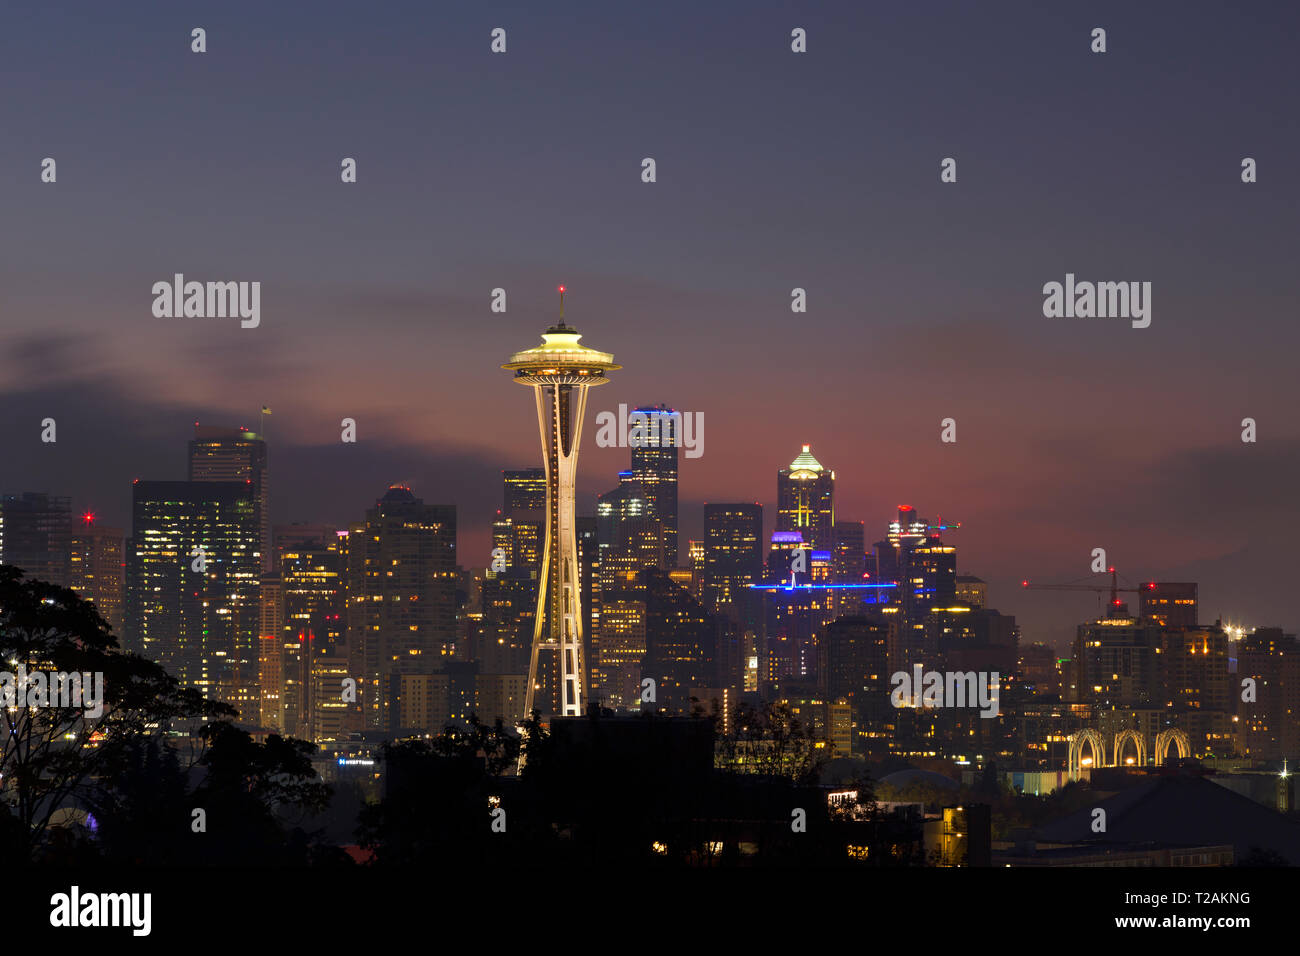 WA16101-00...WASHINGTON - The Space Needle and the highrises of downtown Seattle from Kerry Park. Stock Photo